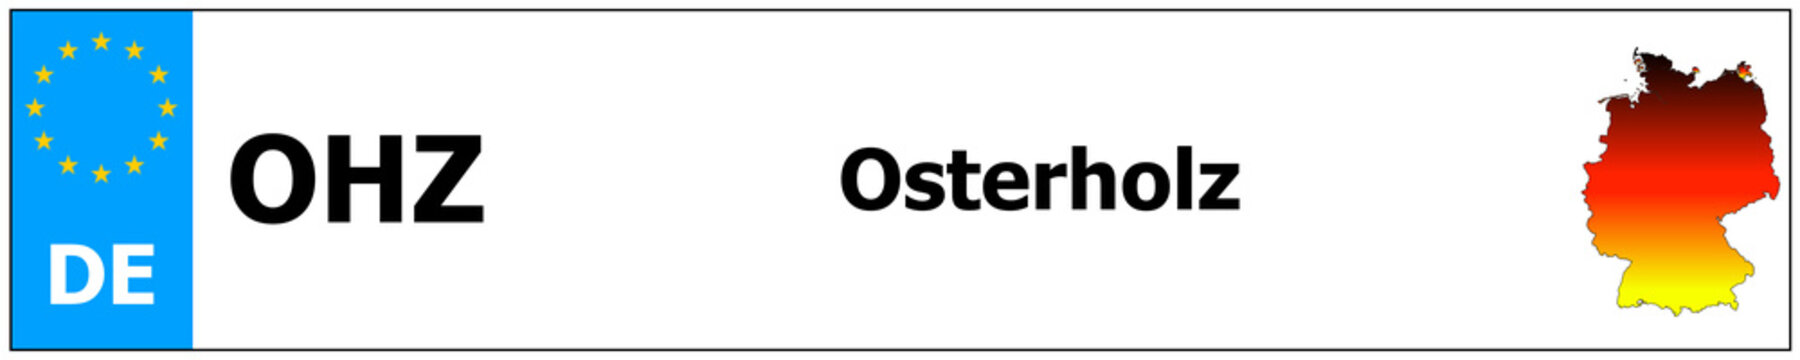 Osterholz car licence plate sticker name and map of Germany. Vehicle registration plates frames German number